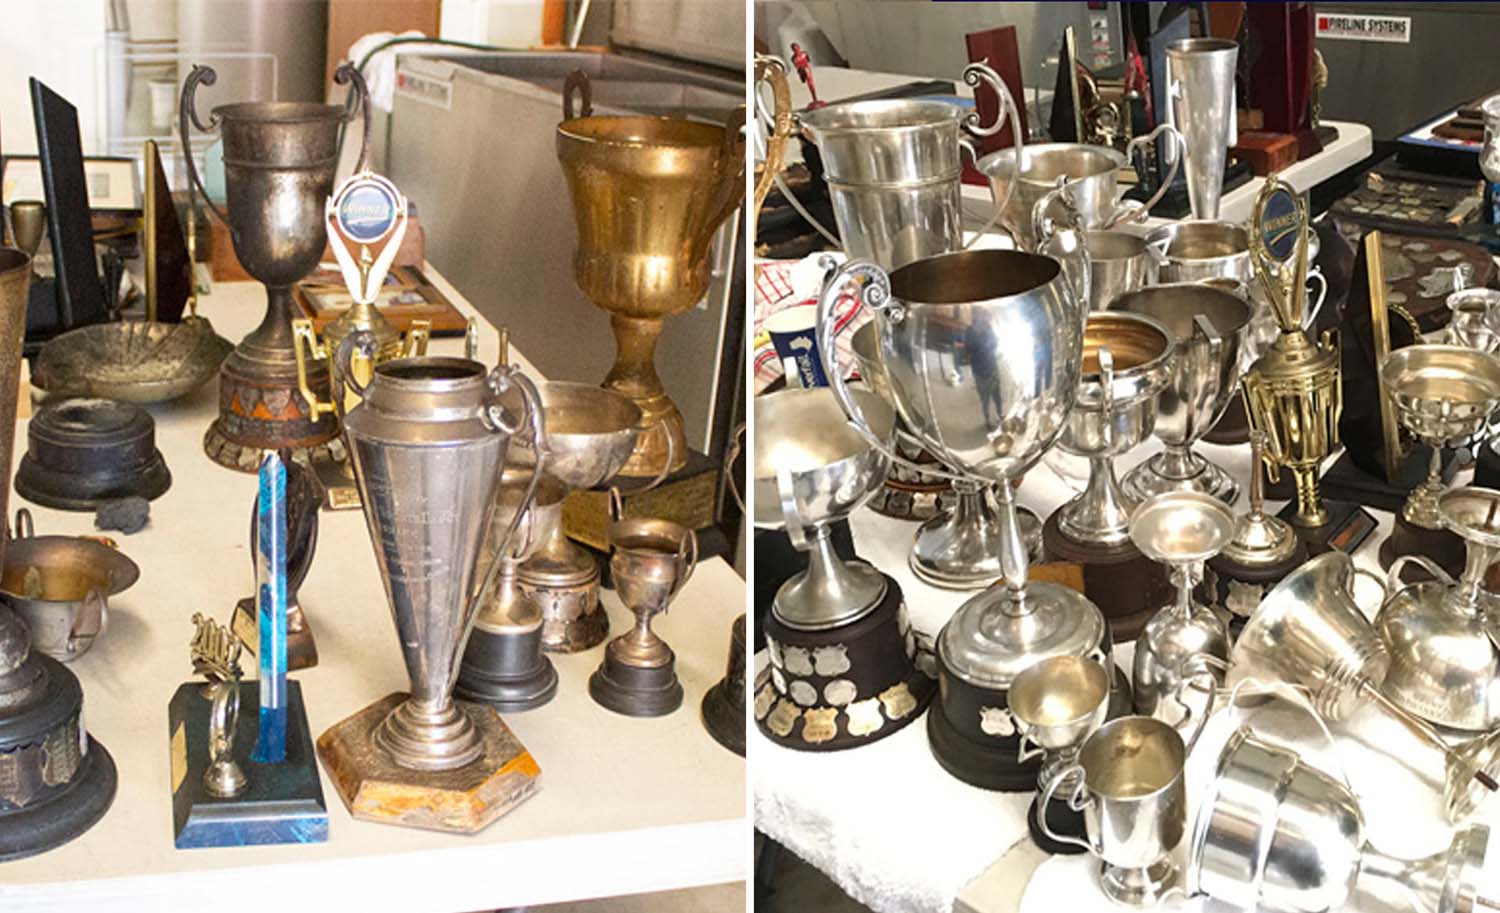 Contents restoration of smoke and soot affected trophies from a school, after a fire.